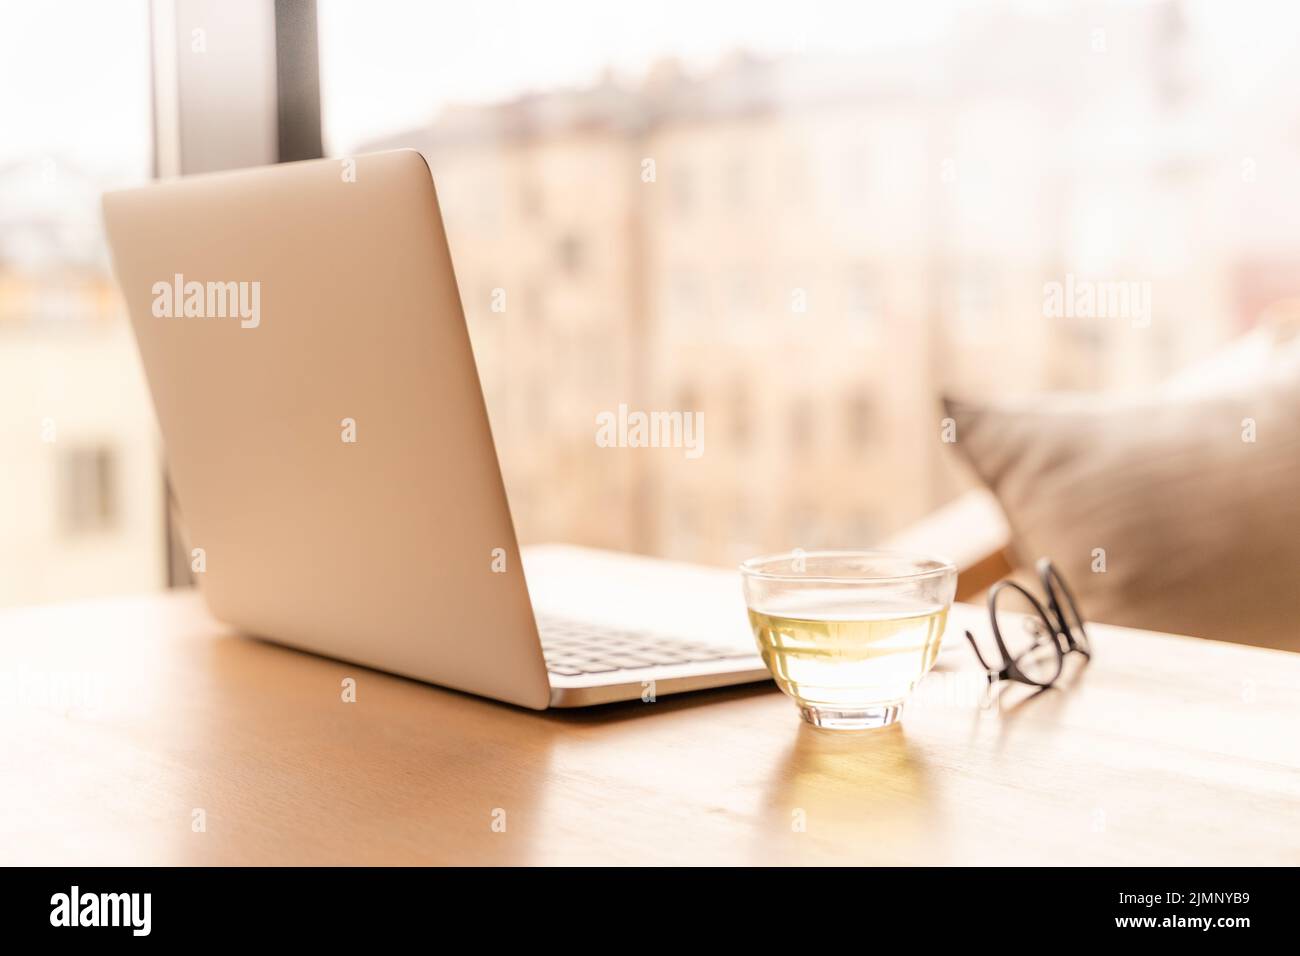 Freelance Desk with open laptop, cup of green tea and glasses on table. Stock Photo